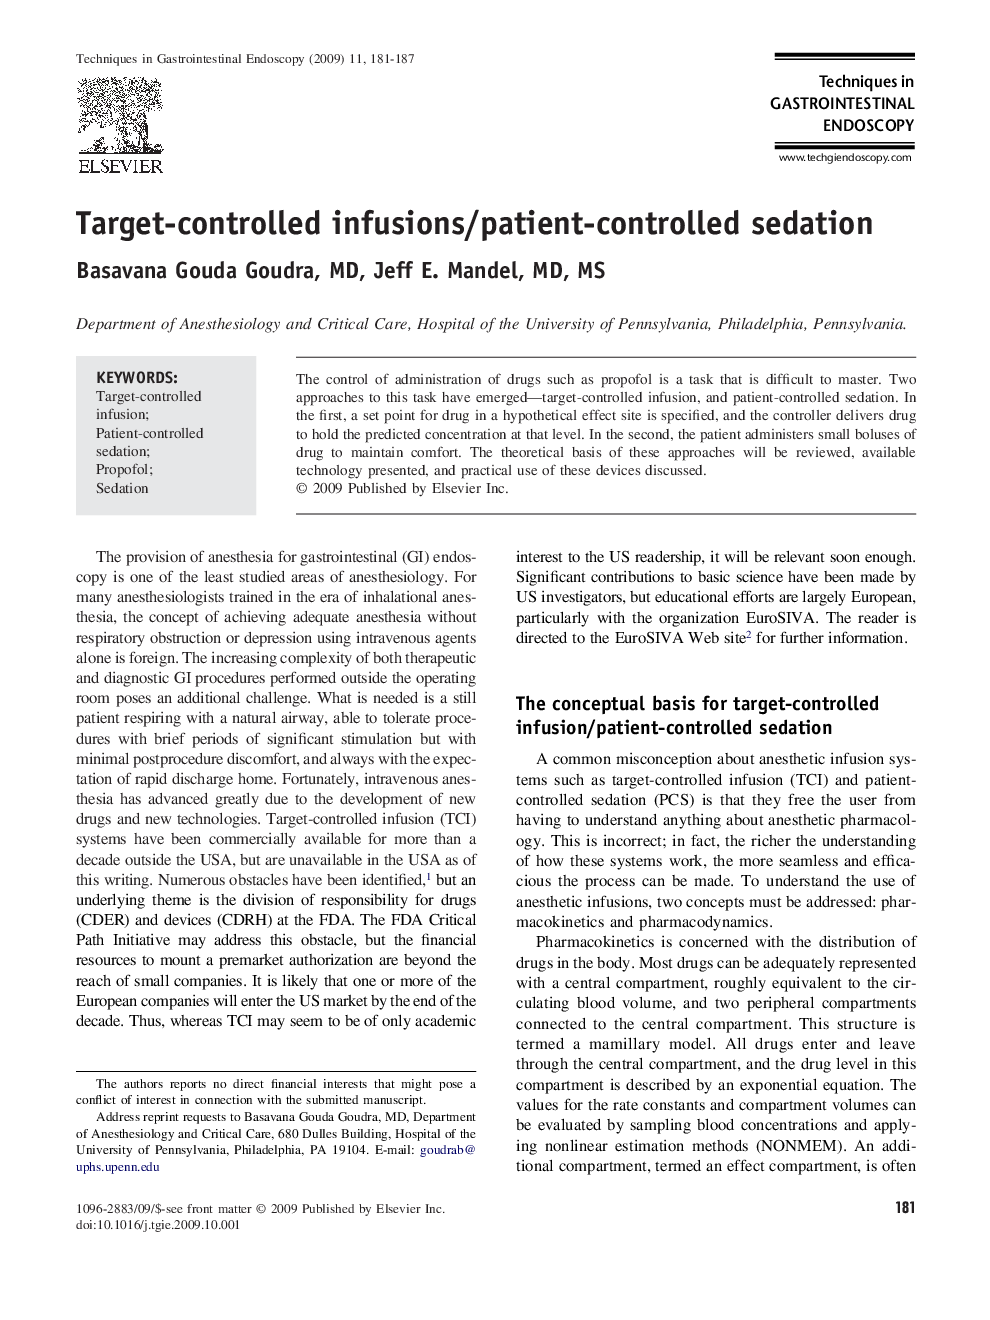 Target-controlled infusions/patient-controlled sedation